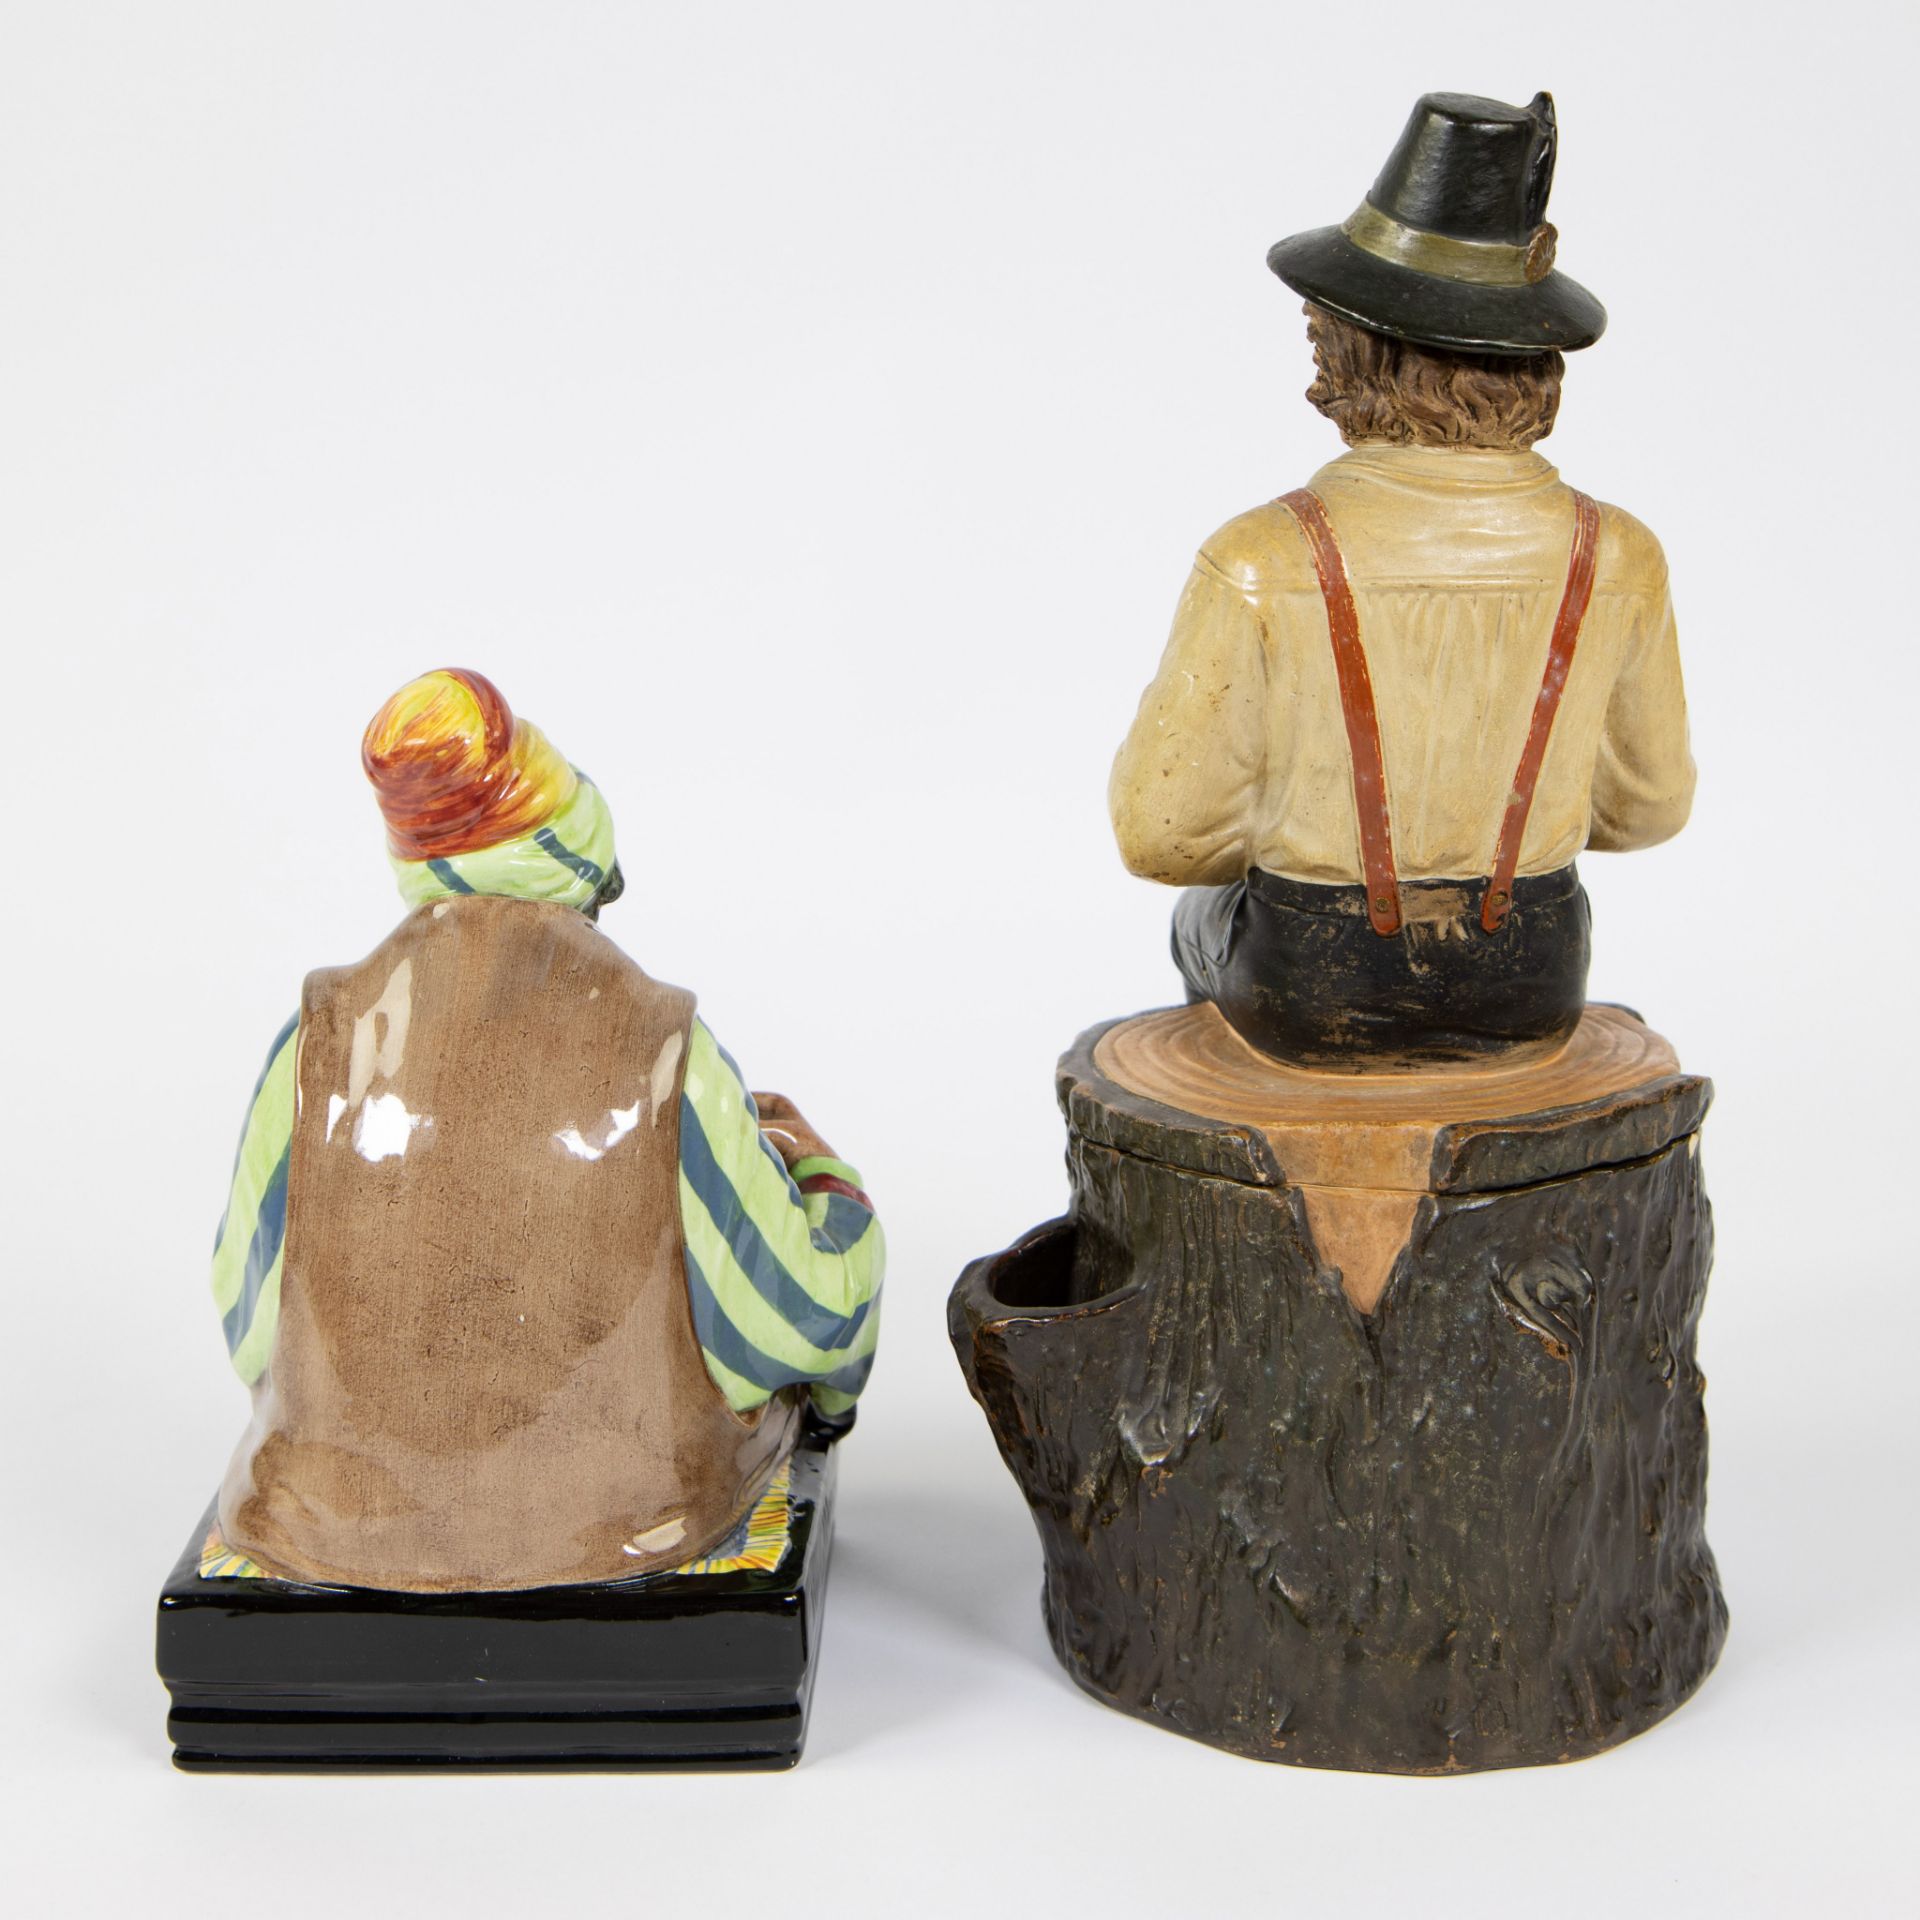 Rare signed by Charles Noke Royal Doulton The Cobbler HN1706 and Terracotta tobacco jar Germany ca. - Image 3 of 5